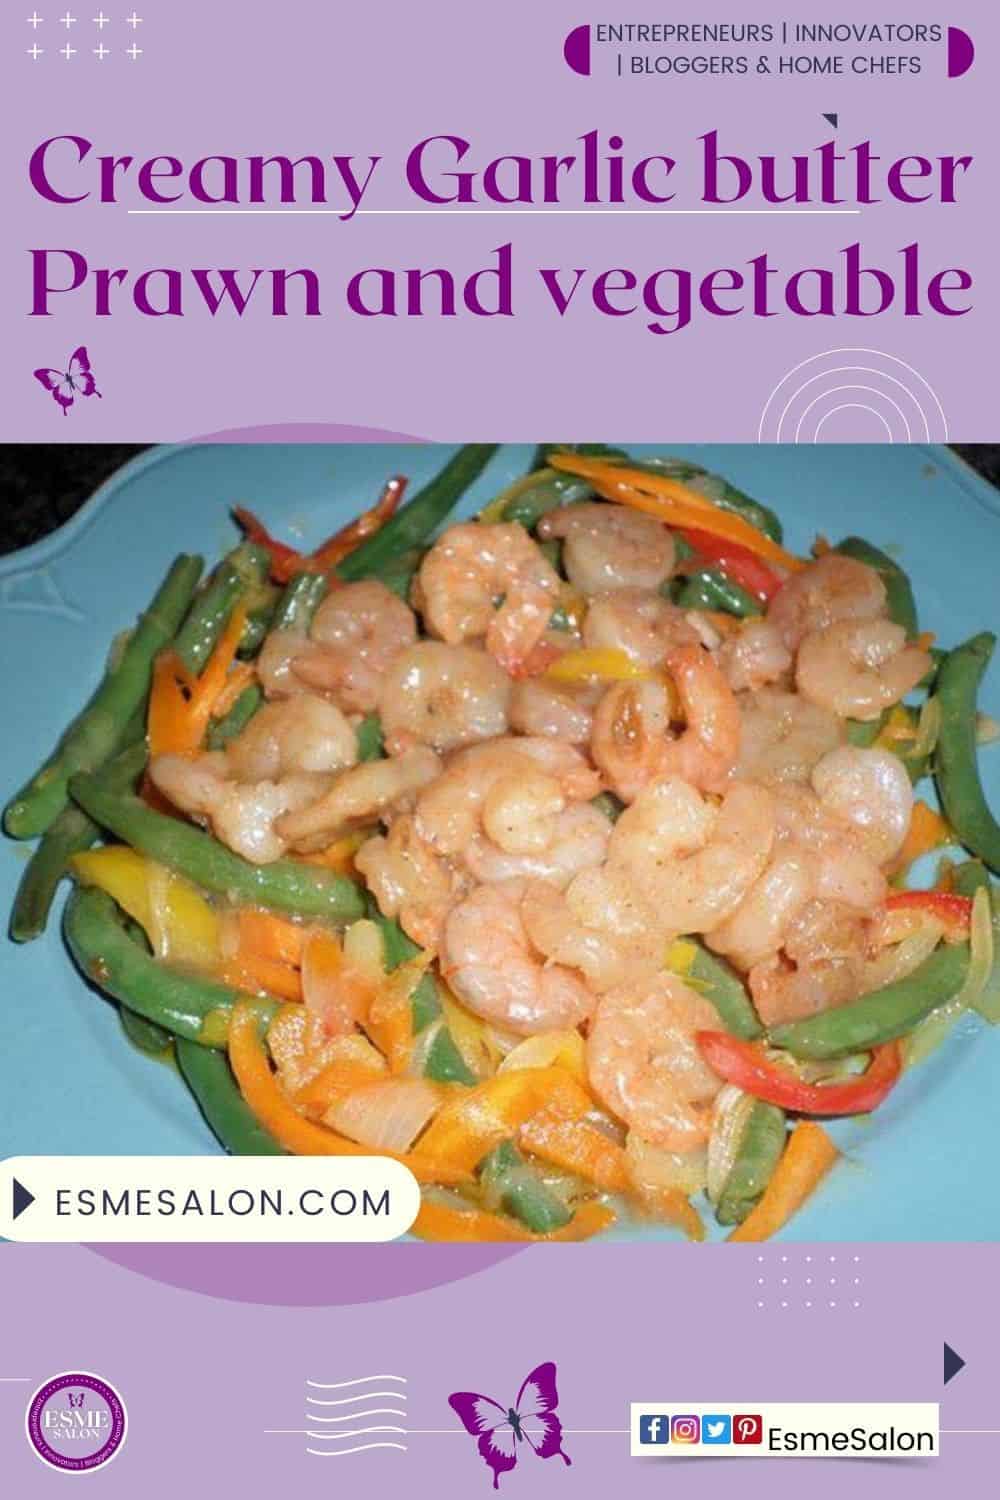 An image of a light blue plate with Creamy Garlic butter Prawn and vegetables